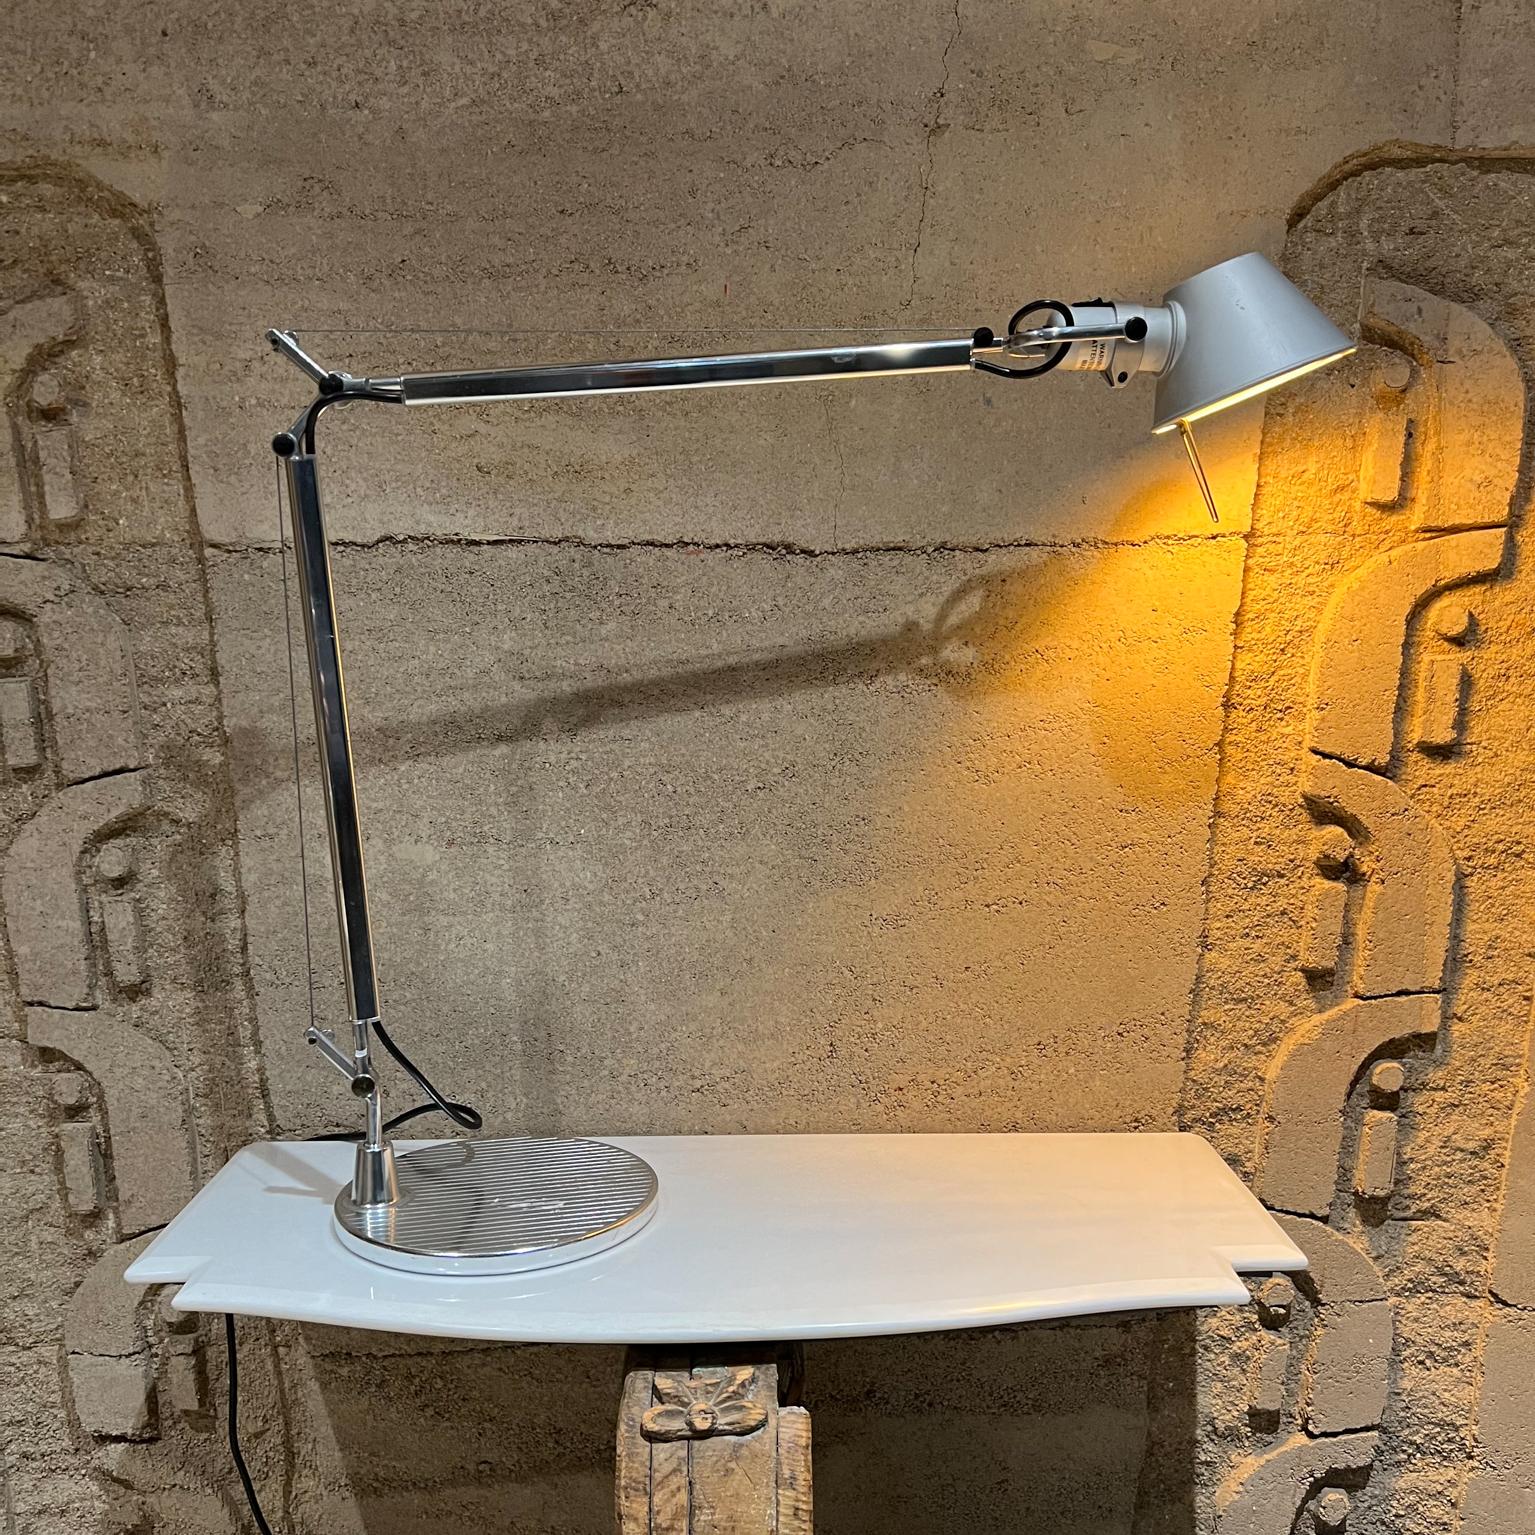 Modern Artemide Classic adjustable balance Task Desk Lamp with Base Tolomeo Light Milano ITALY
Maker Stamp present. Created for Artemide in 1987 by Michele De Lucchi and Giancarlo Fassina.
41 tall x base is 9 in diameter 21 d adjustable
Preowned